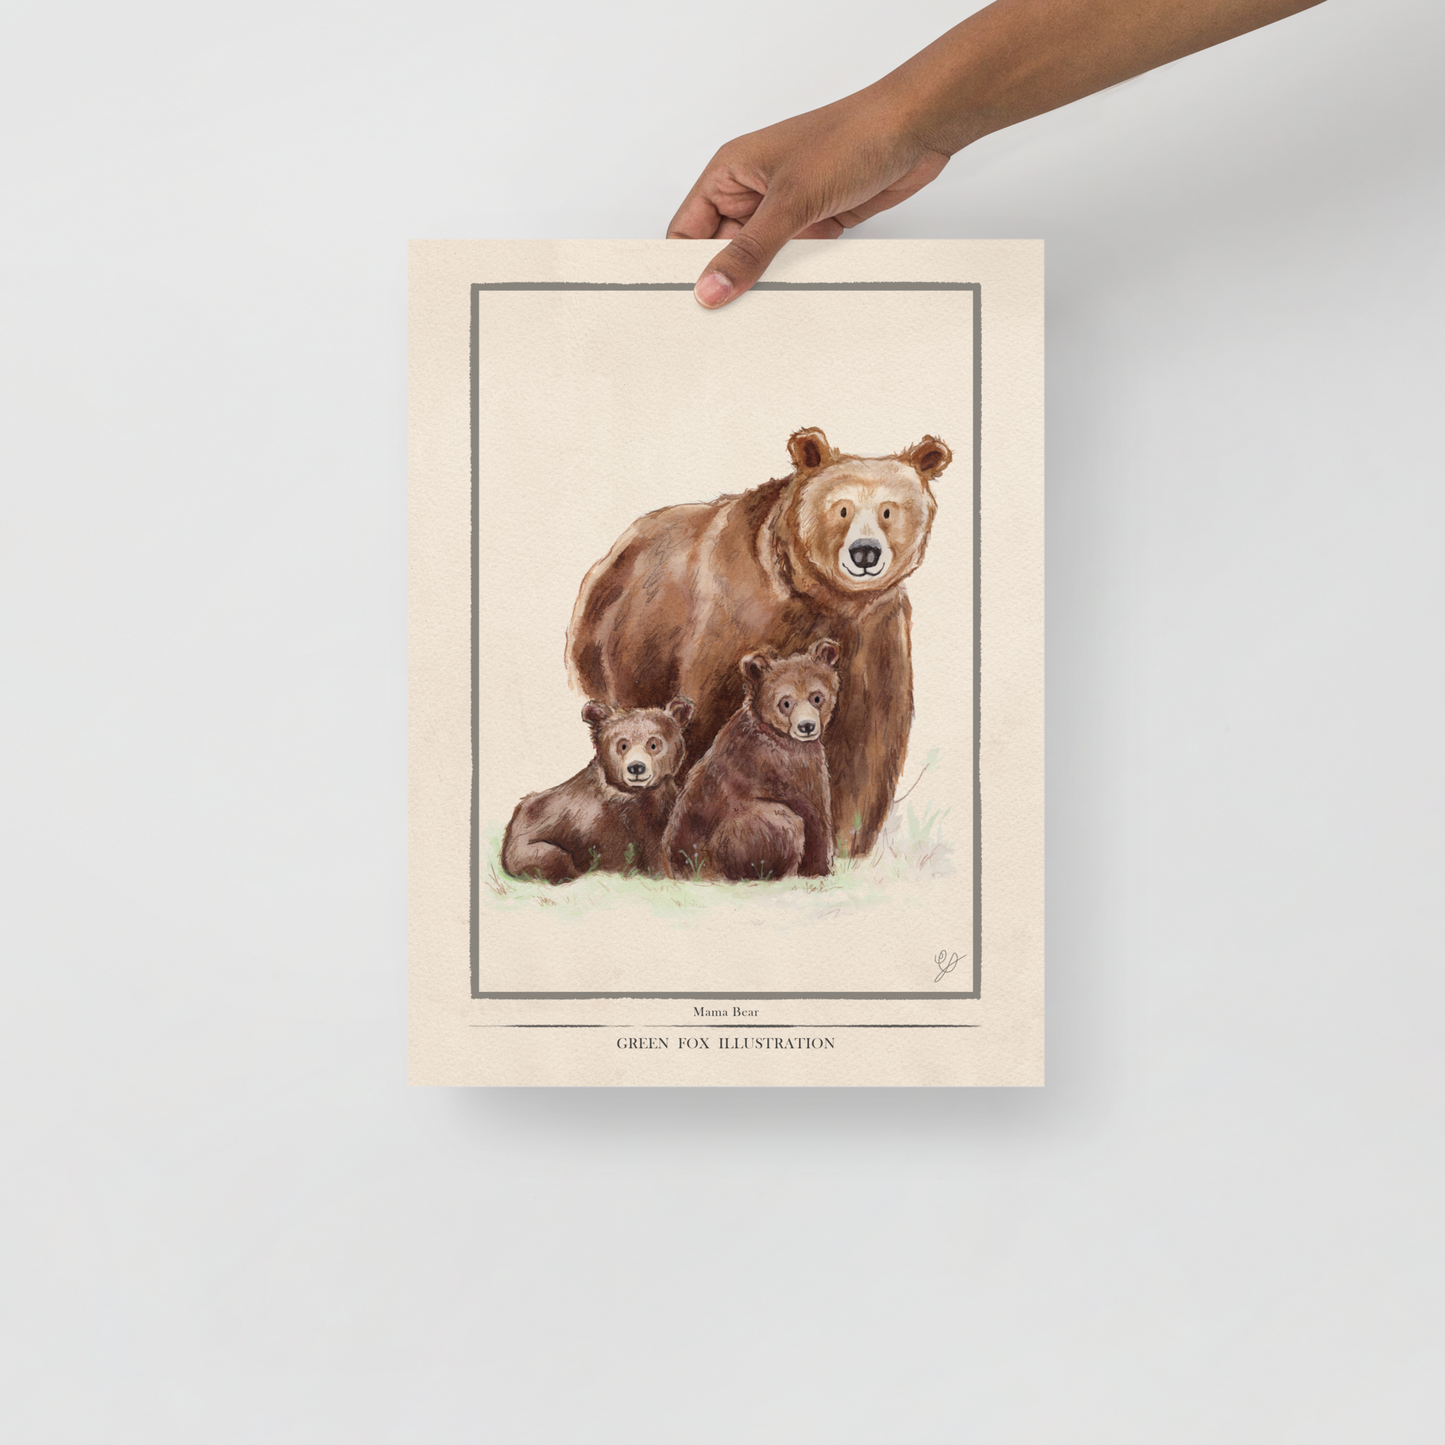 A poster with a watercolour painting of a mama bear and her cubs